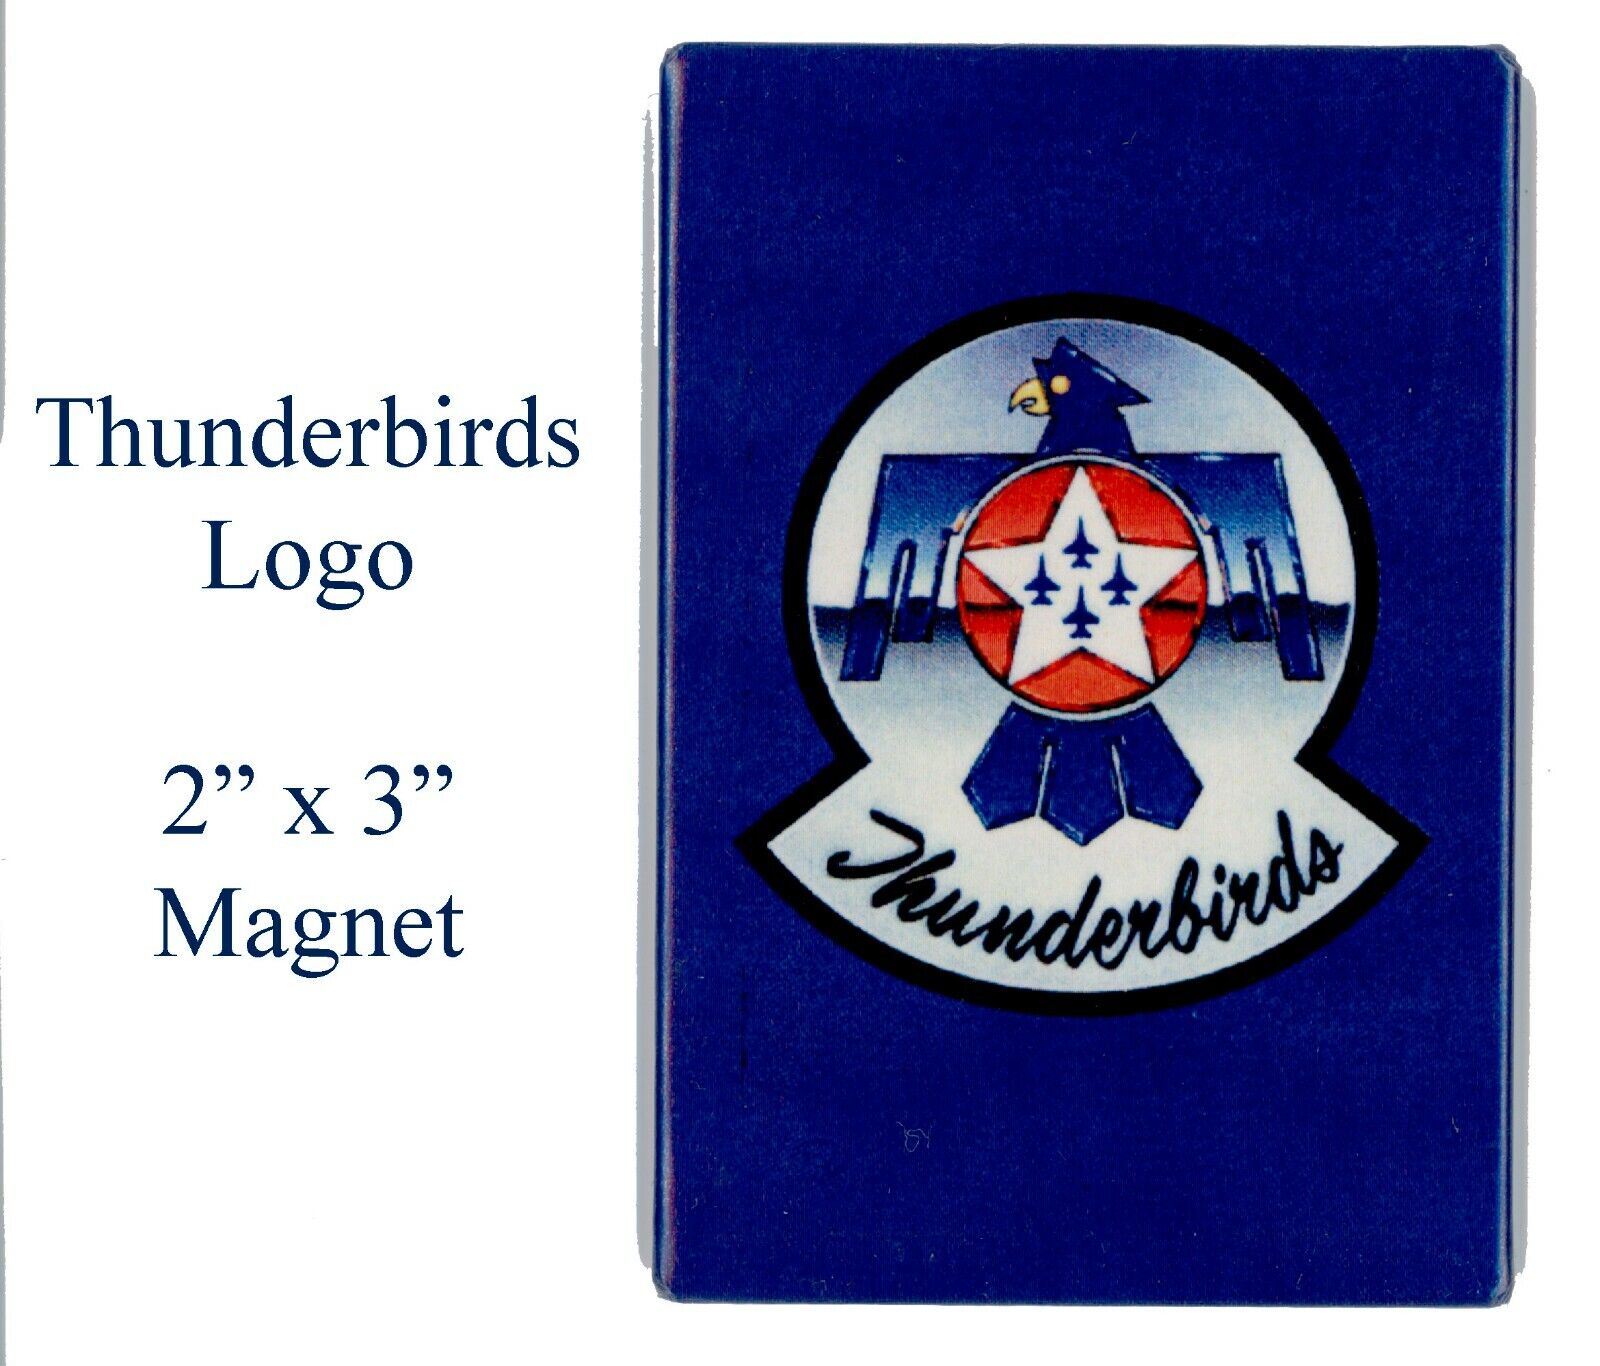 United States Air Force Thunderbirds Logo 1-Magnet Collectible Memento